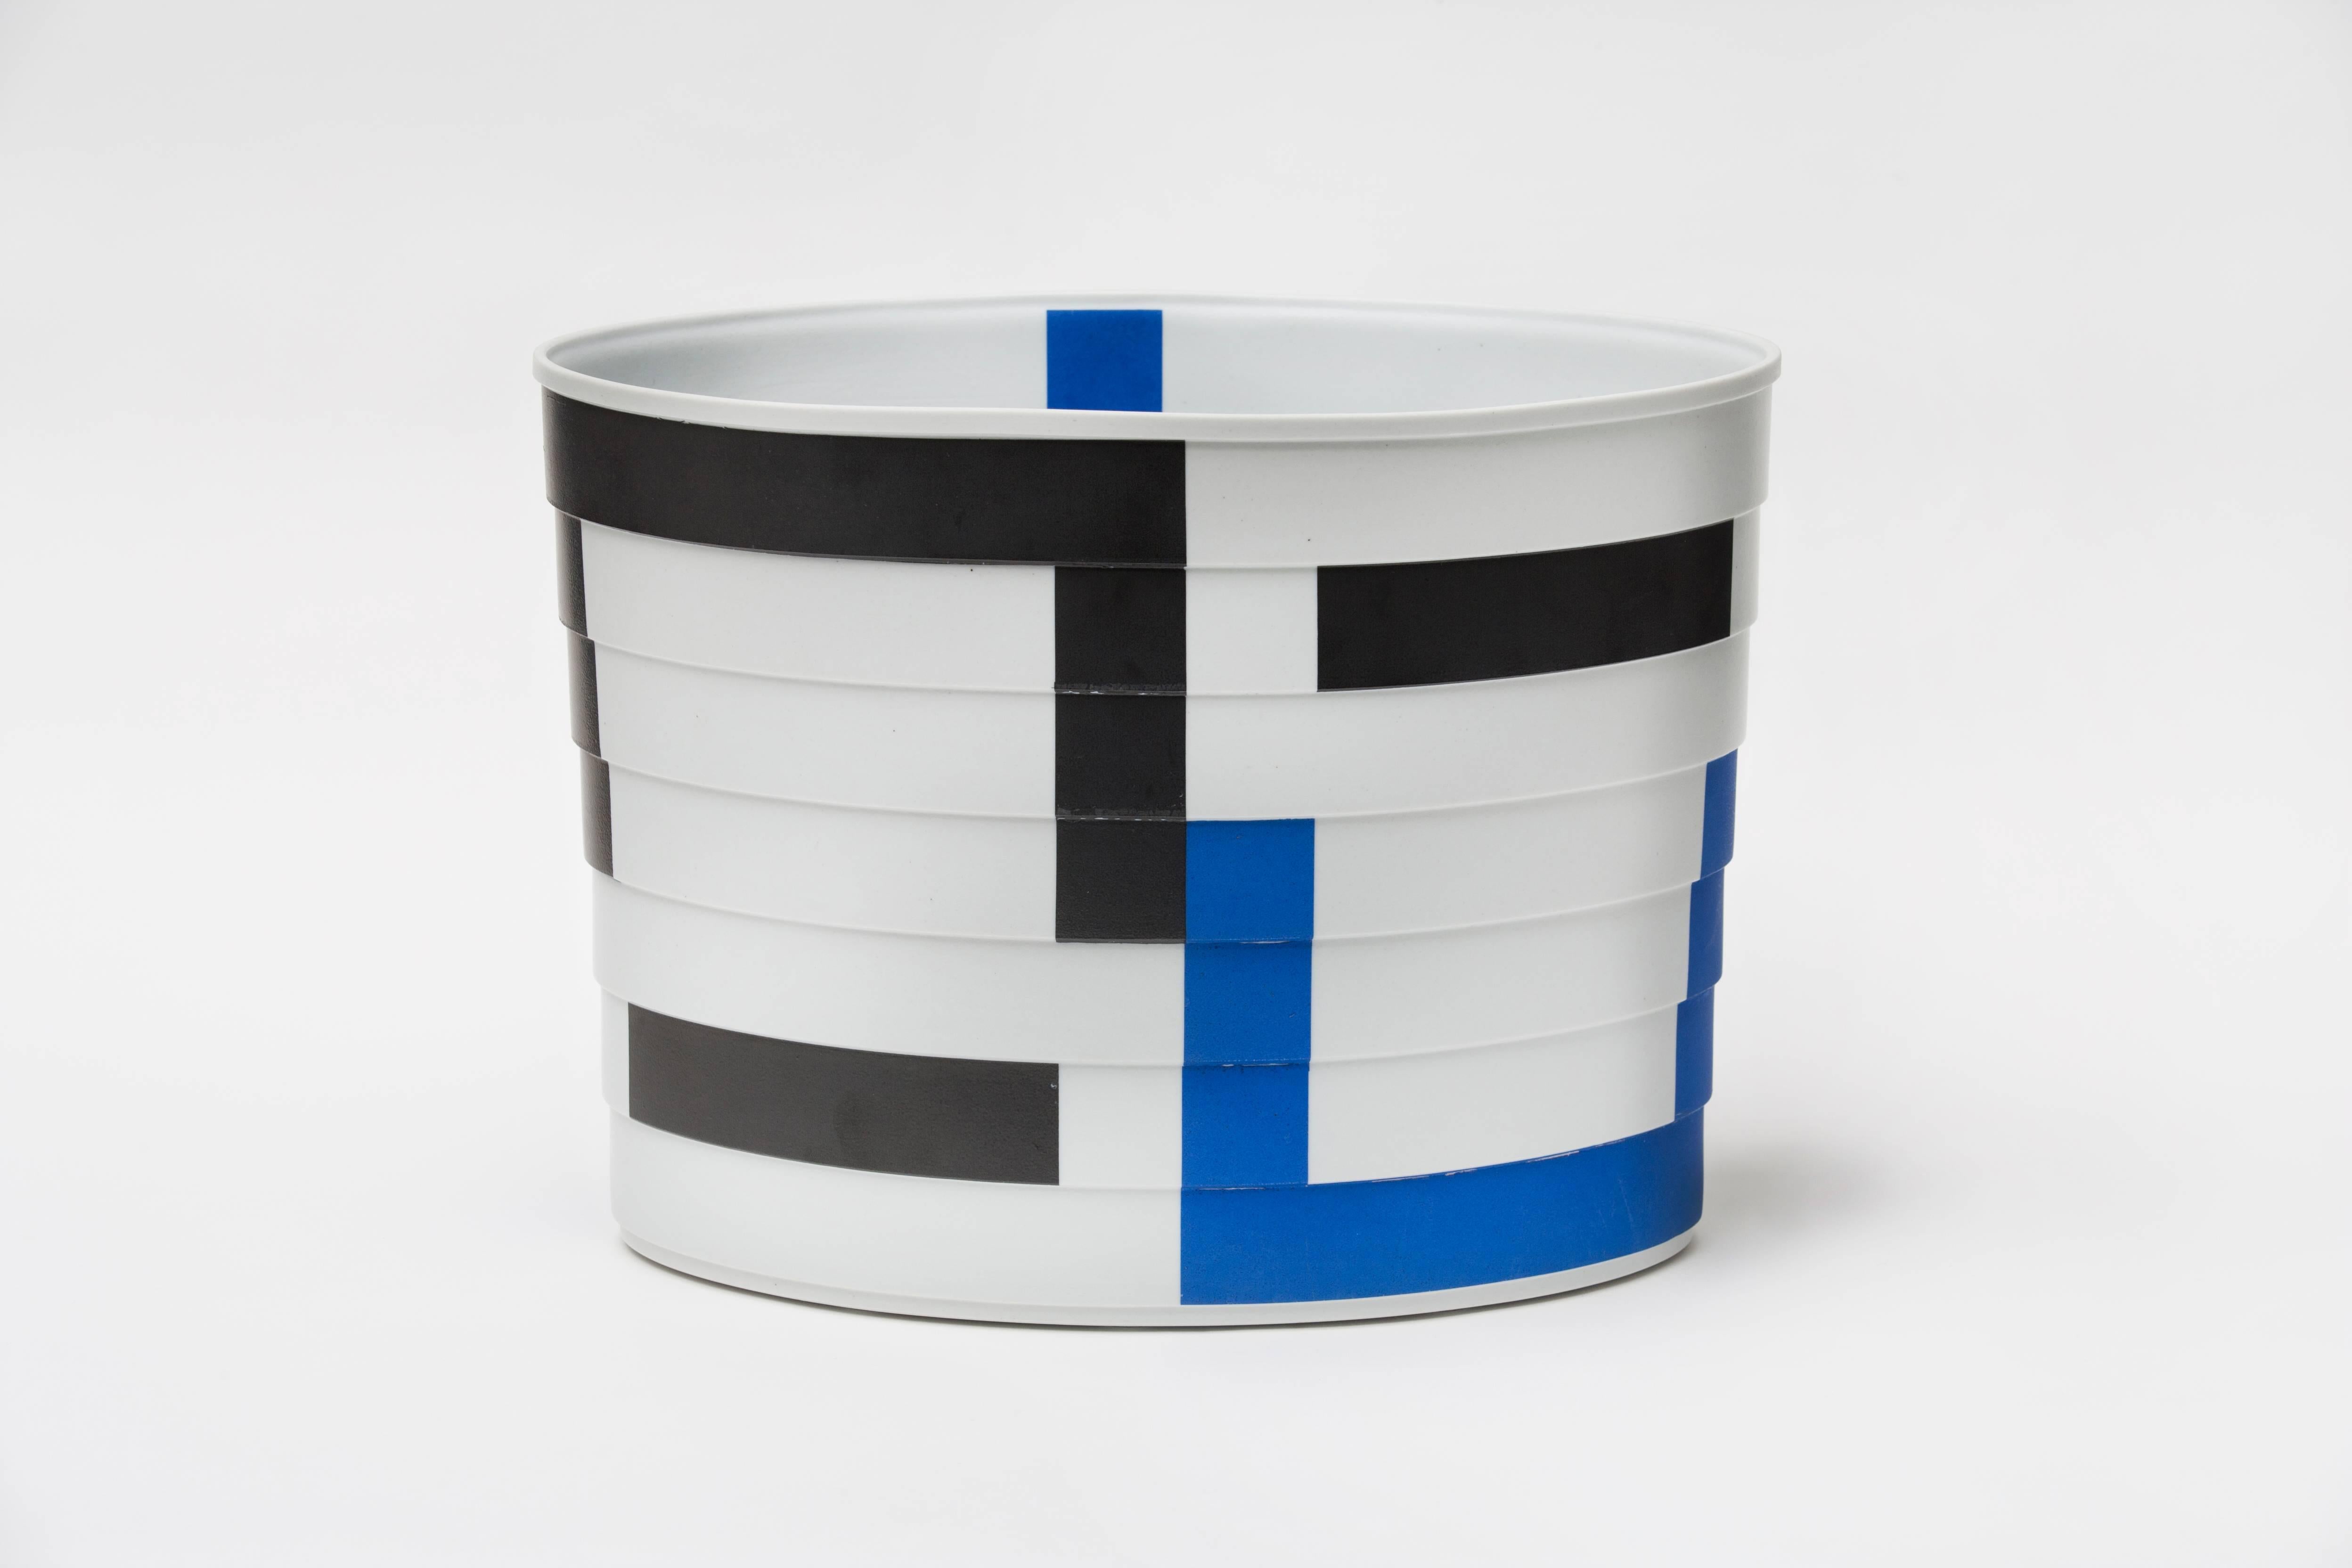 Bodil Manz is a ceramicist known for her use of ultra-thin, translucent eggshell porcelain to create distinctive cylindrical forms, anchored by bold, geometric abstractions in a style evocative of Russian Suprematism. Manz was born in Copenhagen in